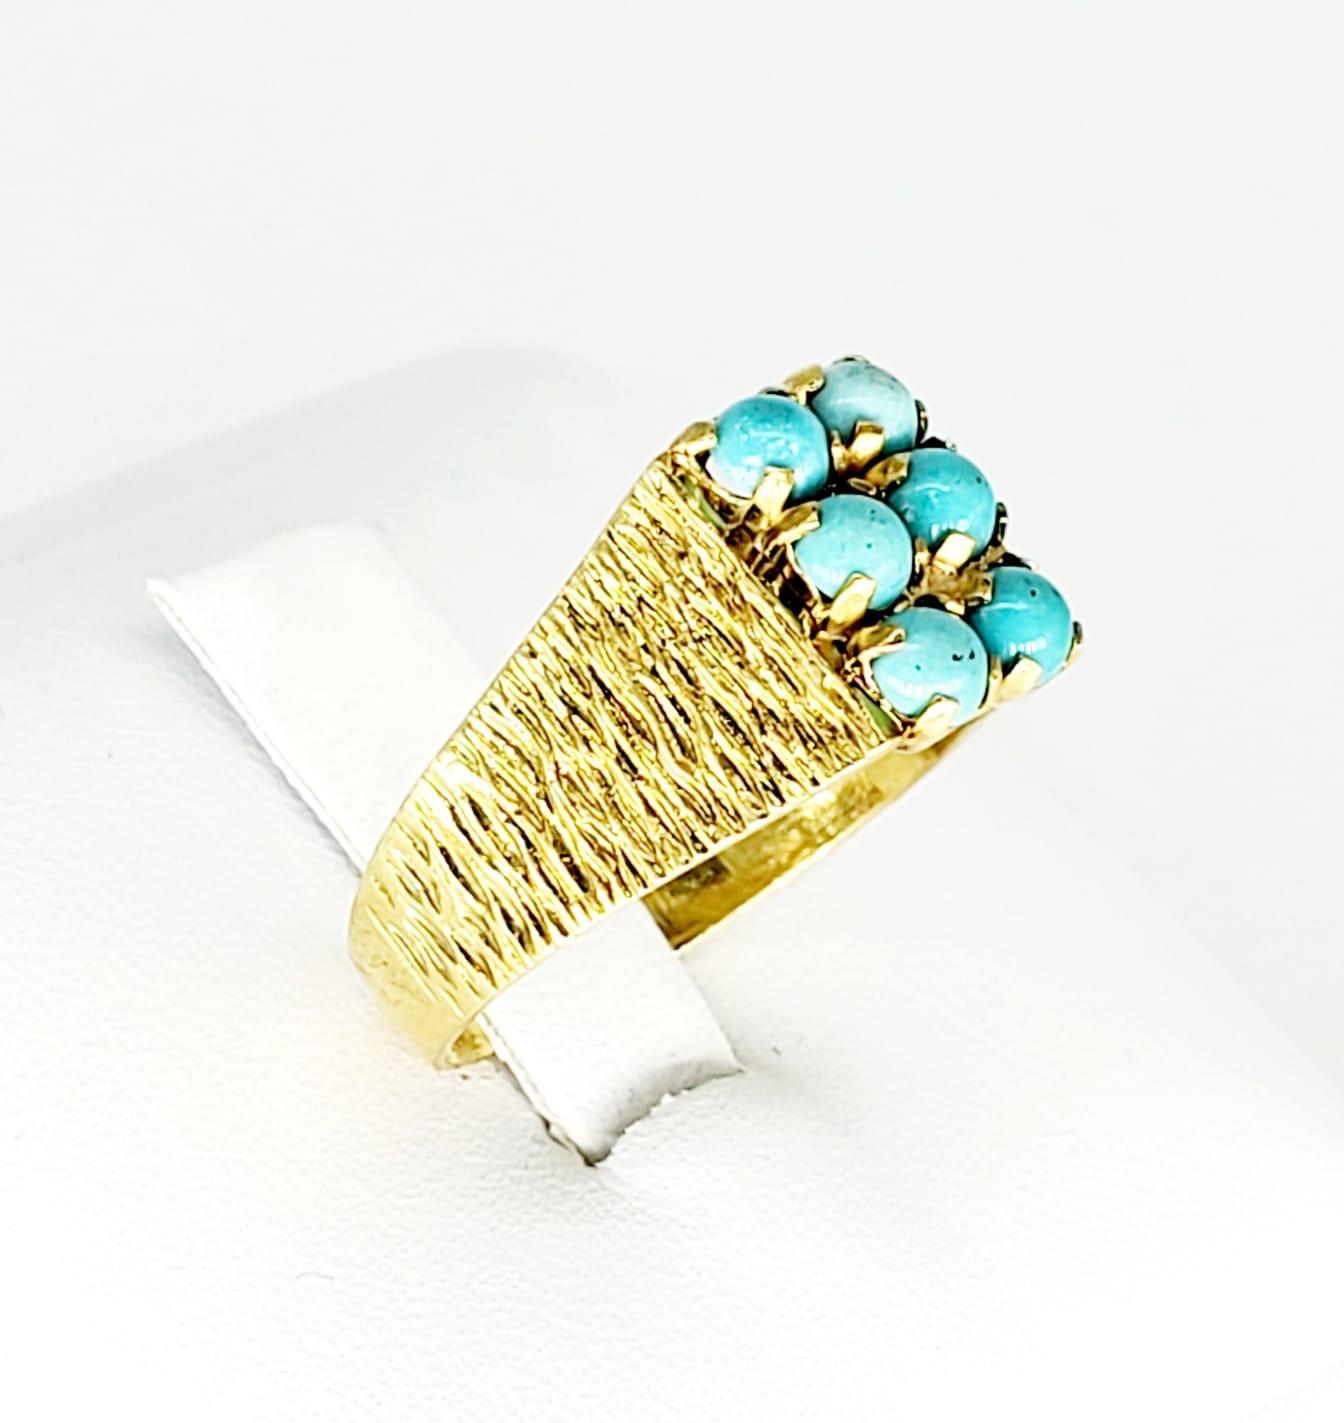 Vintage Turquoise Wood Bark Design Cocktail Ring 18 Karat Gold In Excellent Condition For Sale In Miami, FL